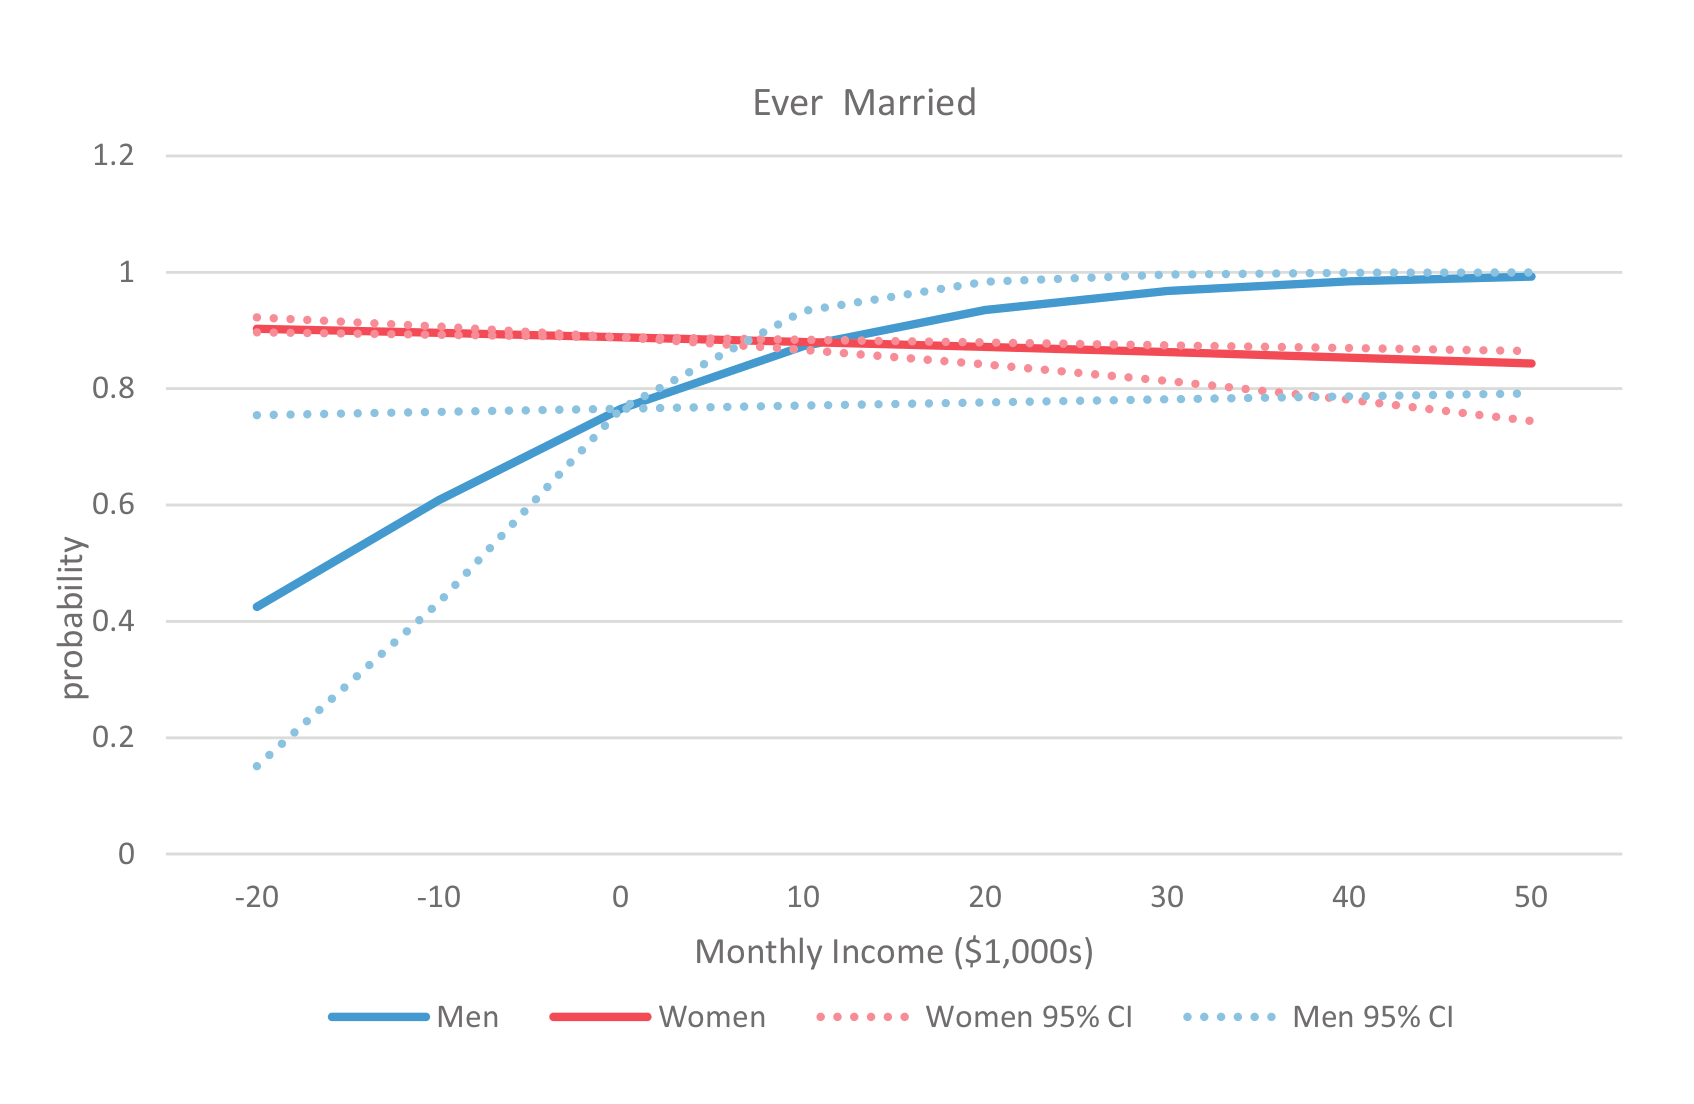 Figure 1: Probability of ever having married by income. (Model prediction with age, education, proportions Black and Hispanic set to their means.)